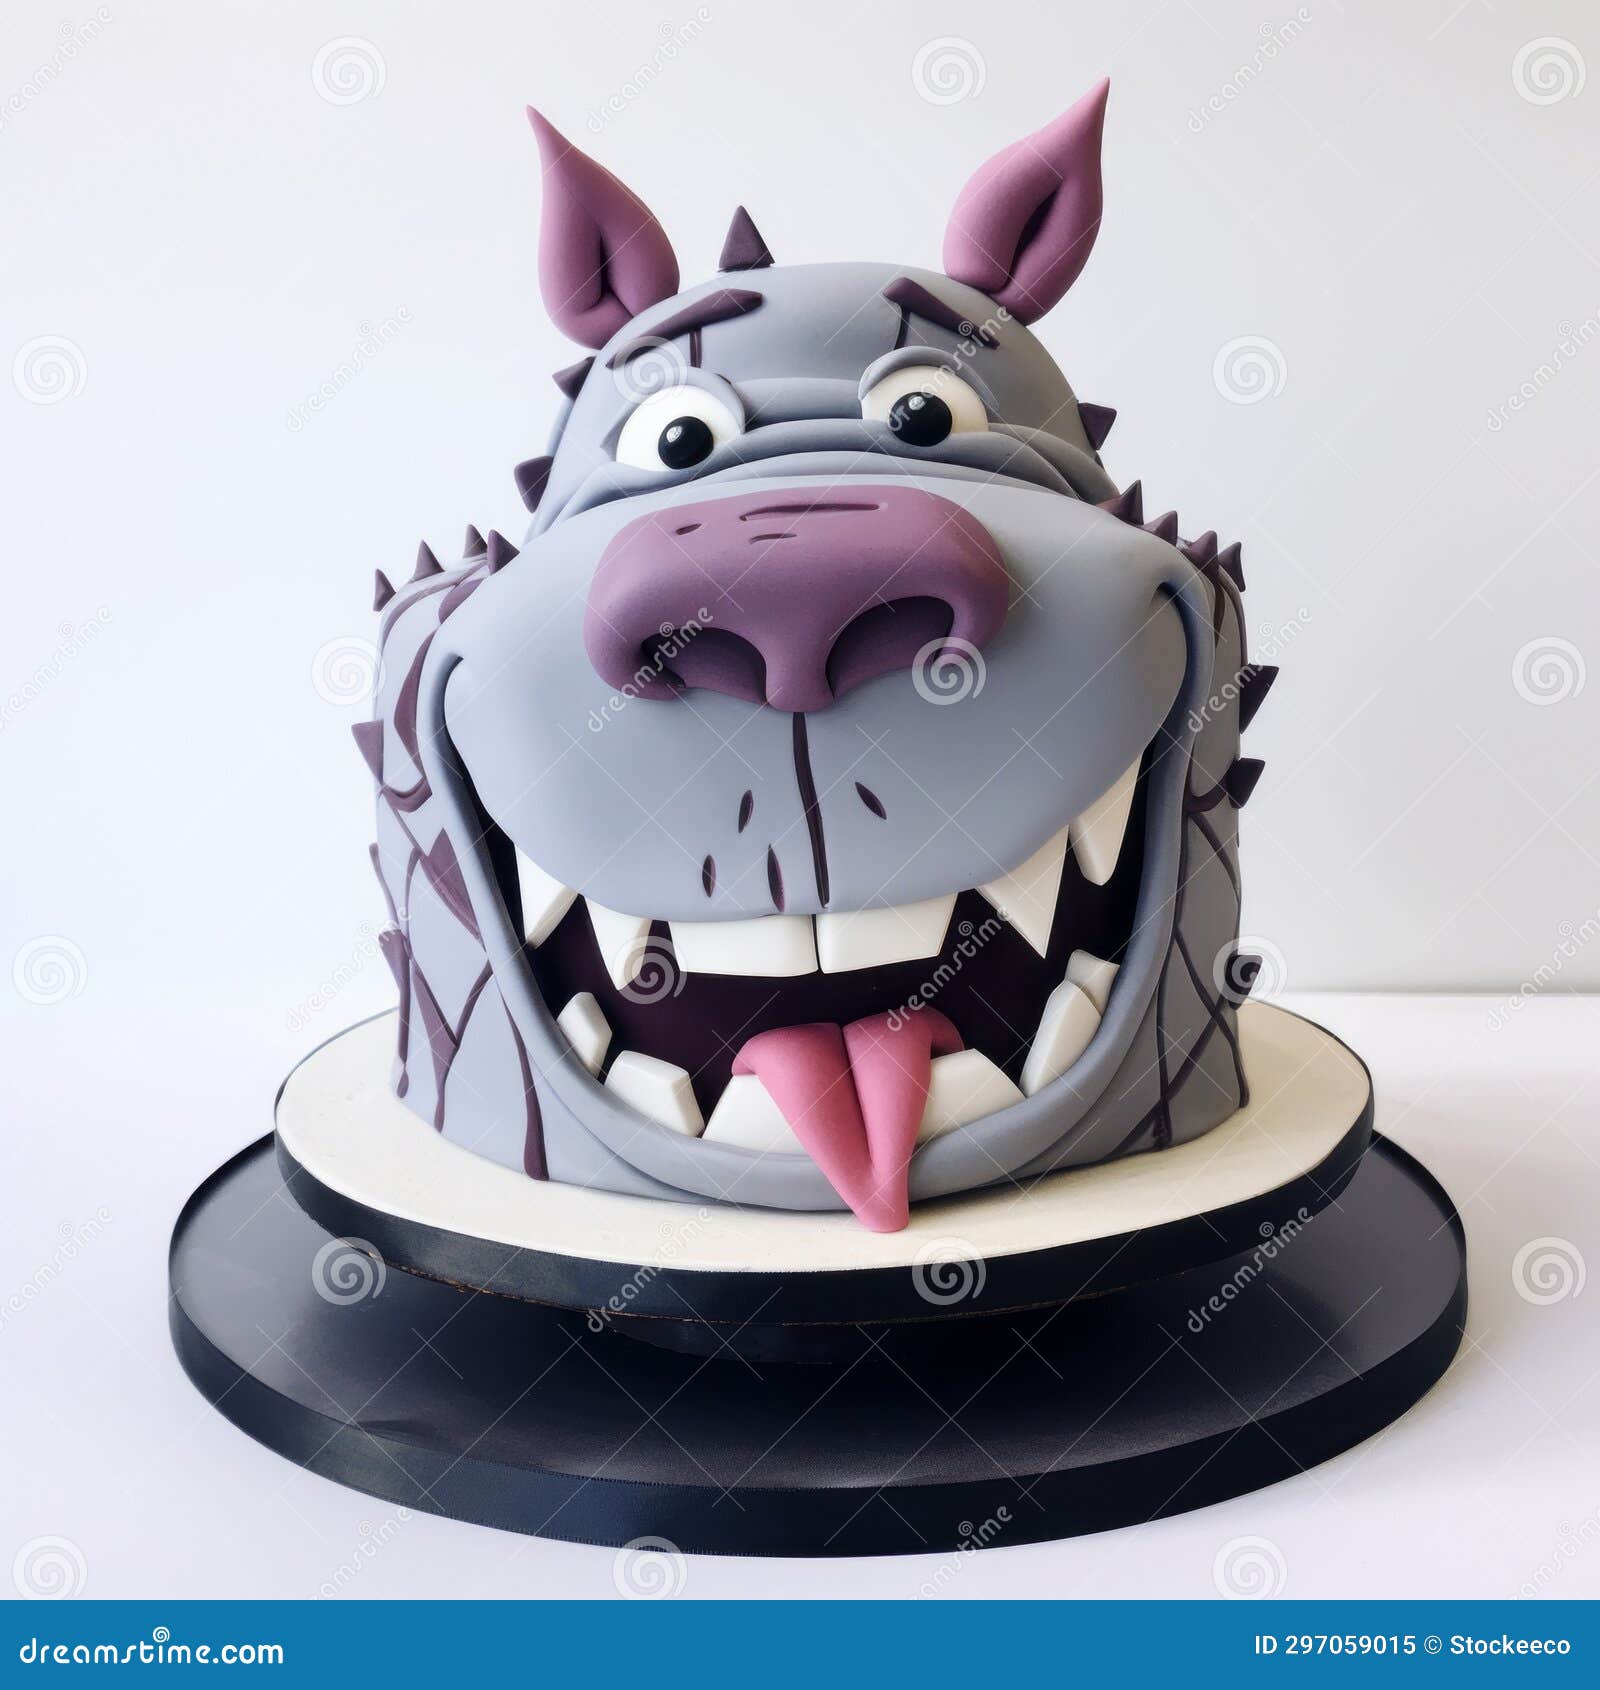 dinocore cake: a detailed 2d rhinoceros theme cake with character caricatures